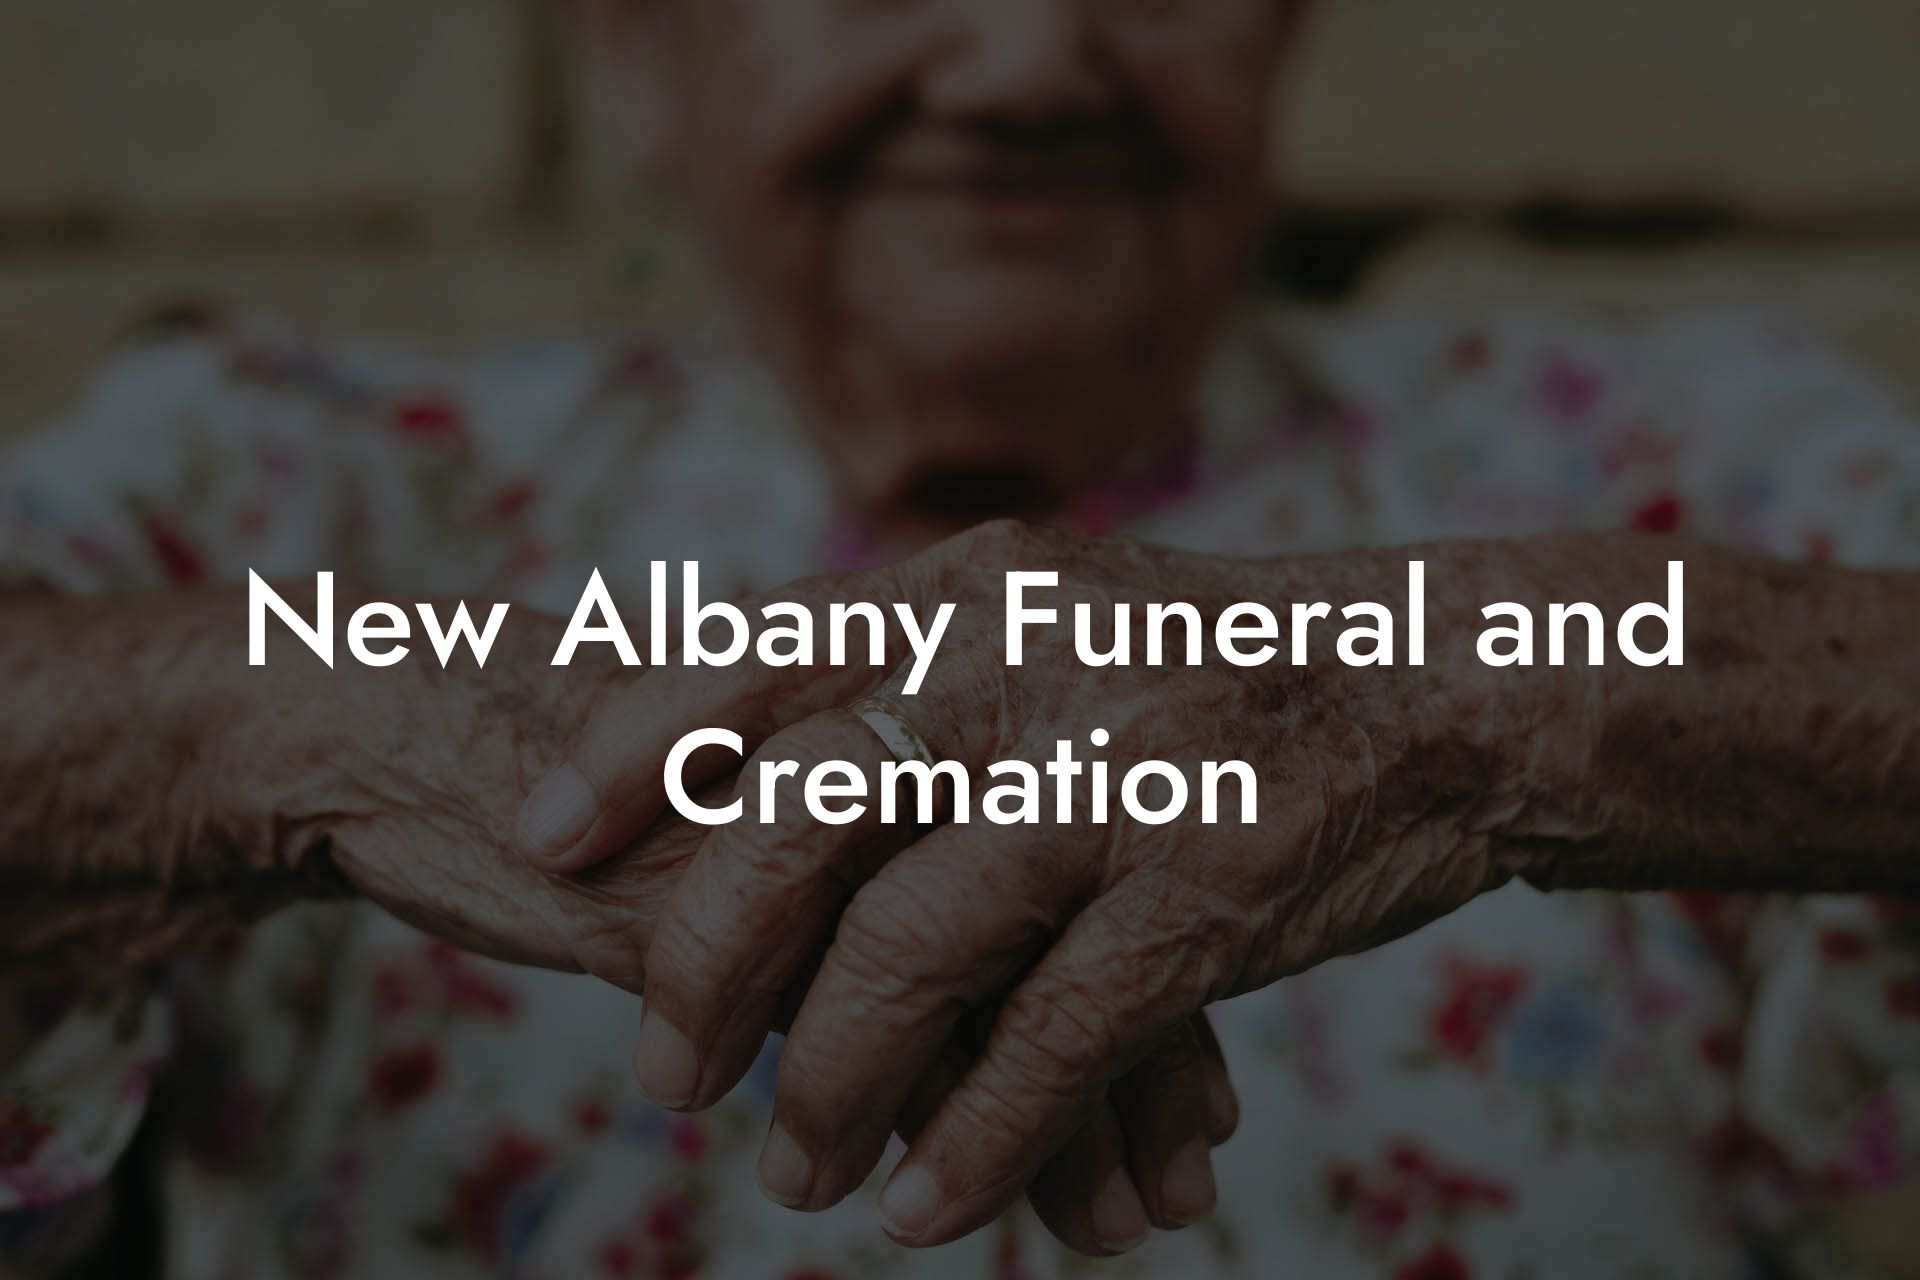 New Albany Funeral and Cremation